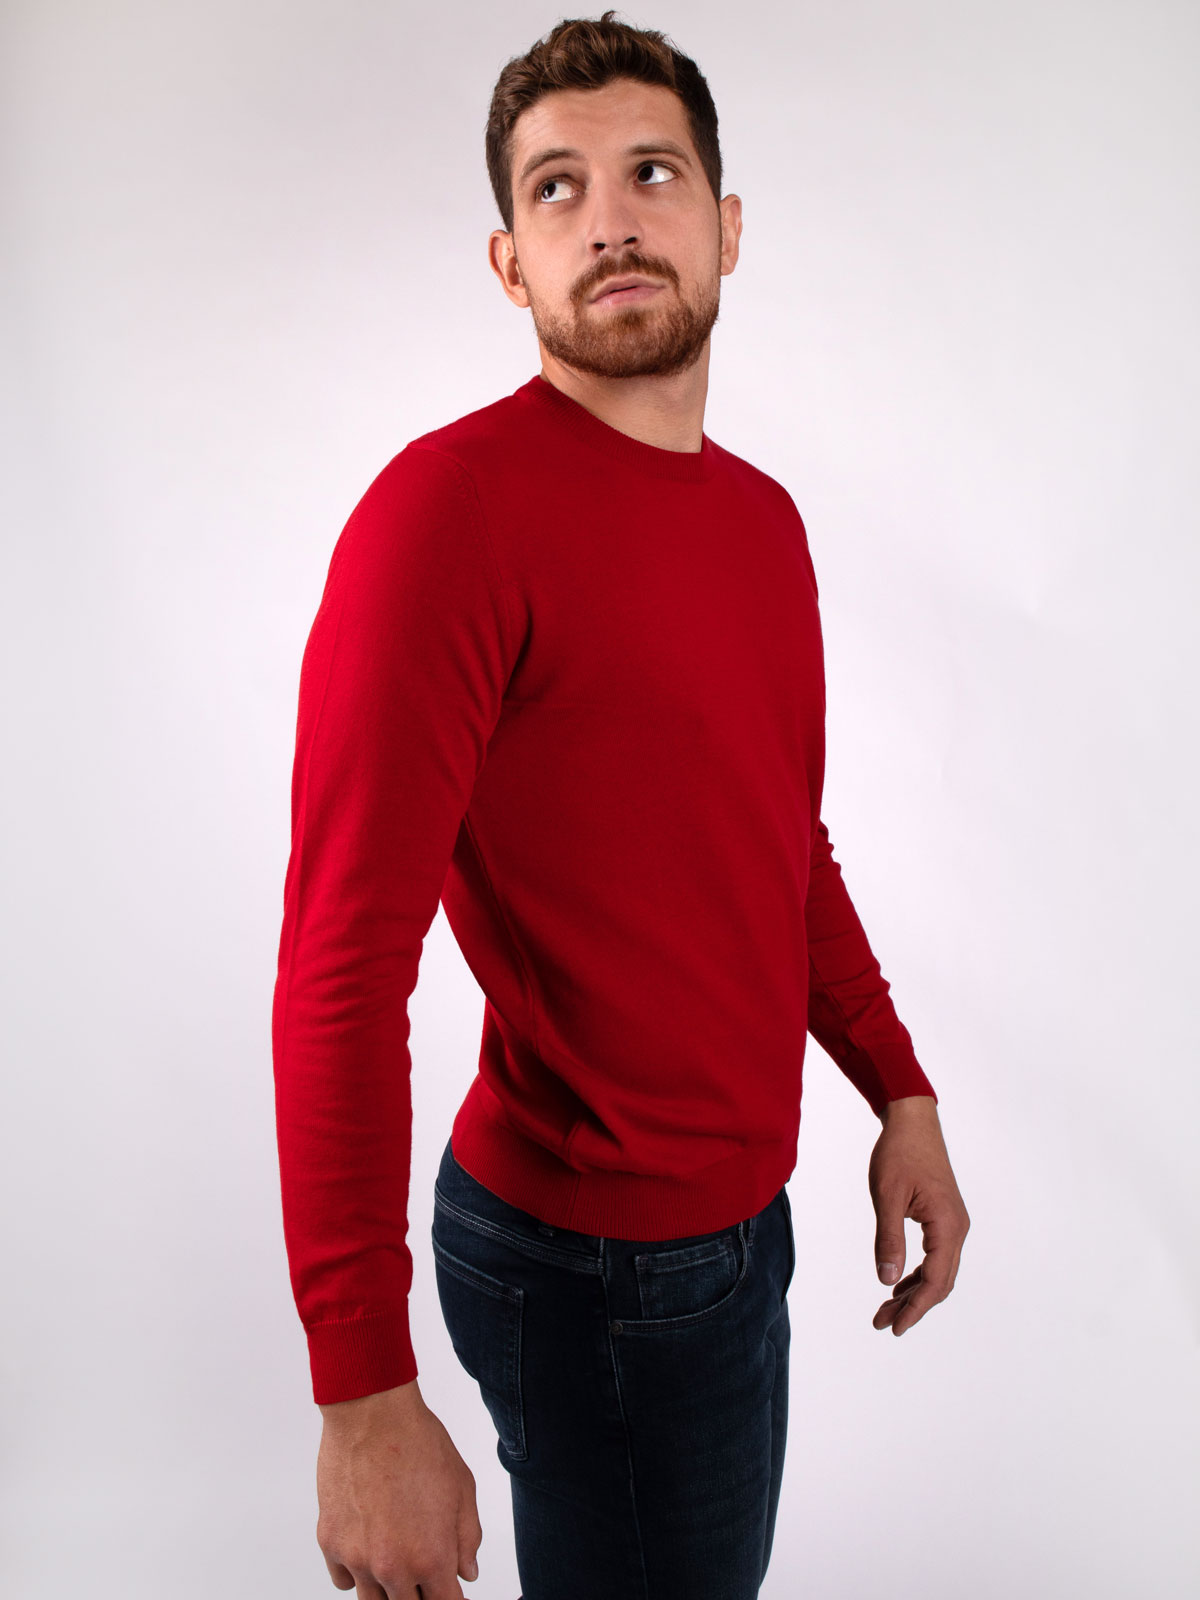 Sweater made of cotton and acrylic in r - 35289 € 27.00 img2